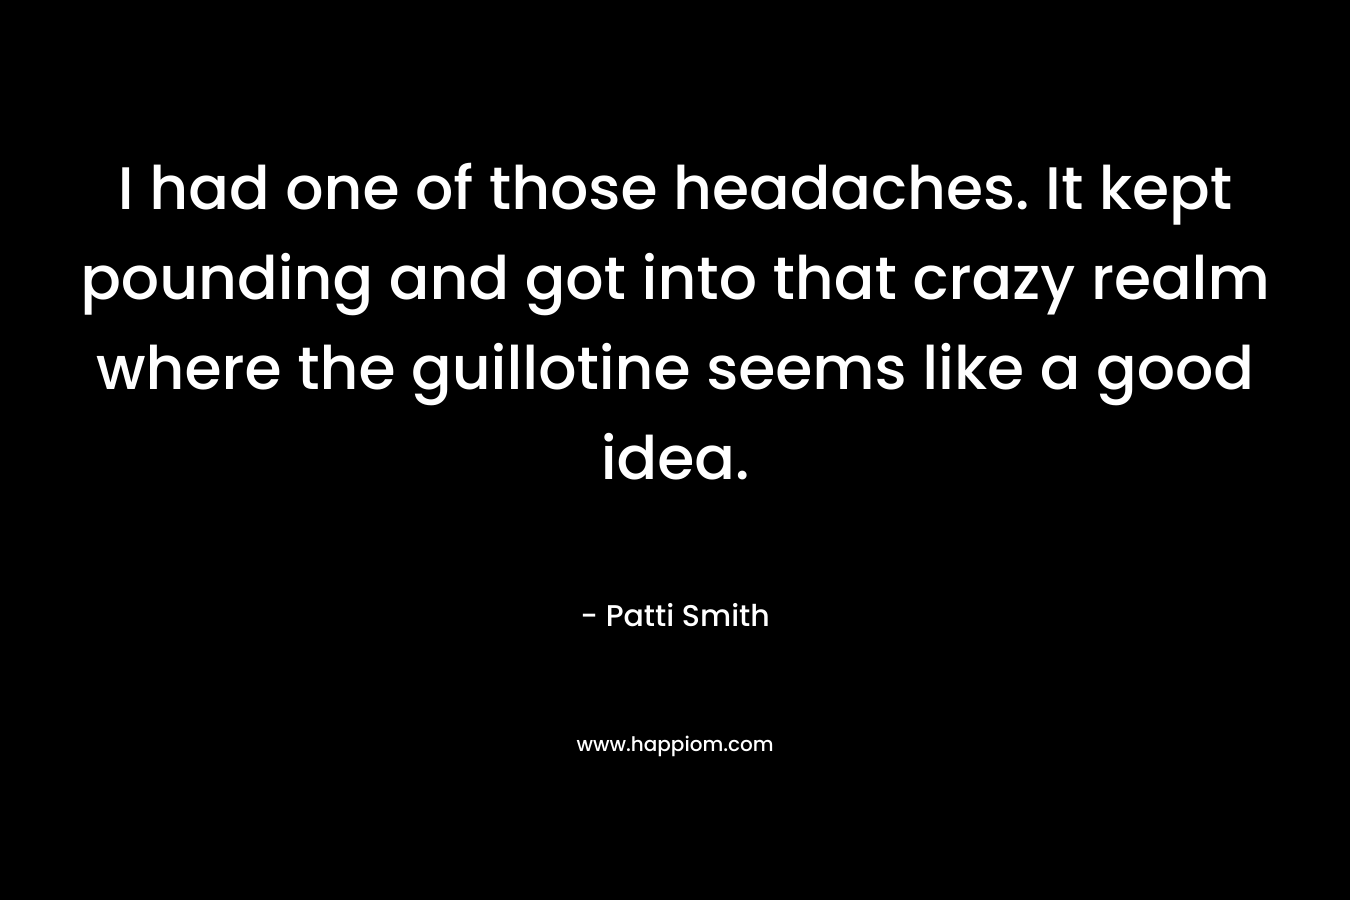 I had one of those headaches. It kept pounding and got into that crazy realm where the guillotine seems like a good idea. – Patti Smith